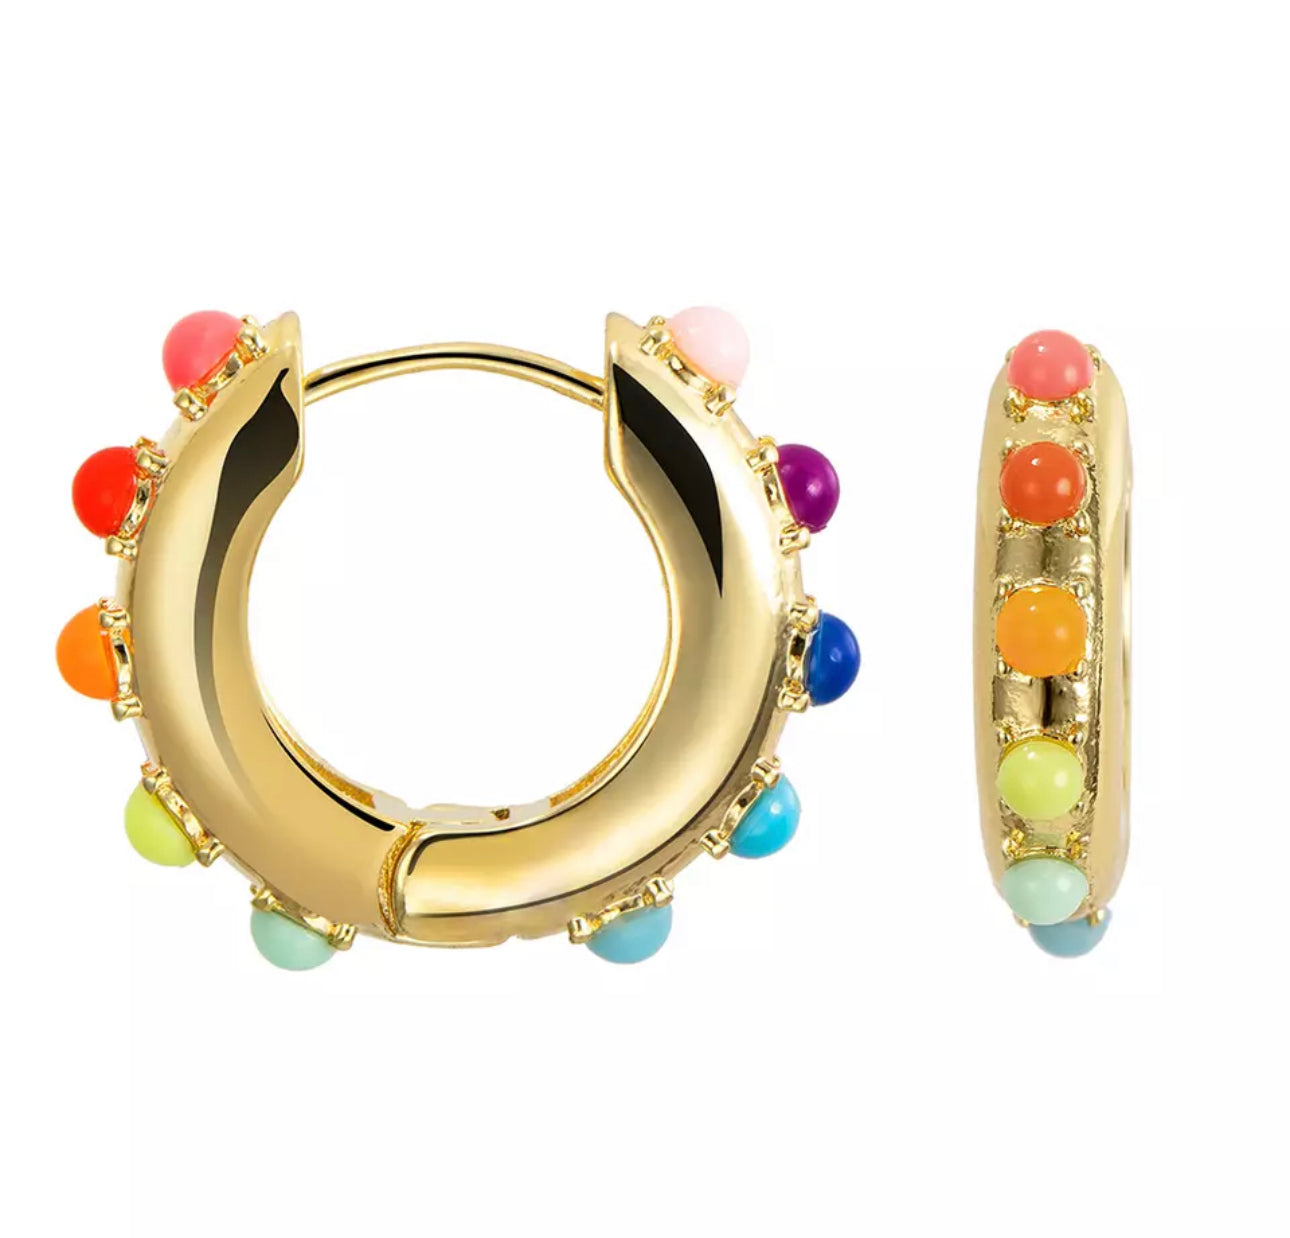 Round Multi-colored Gold Hoops